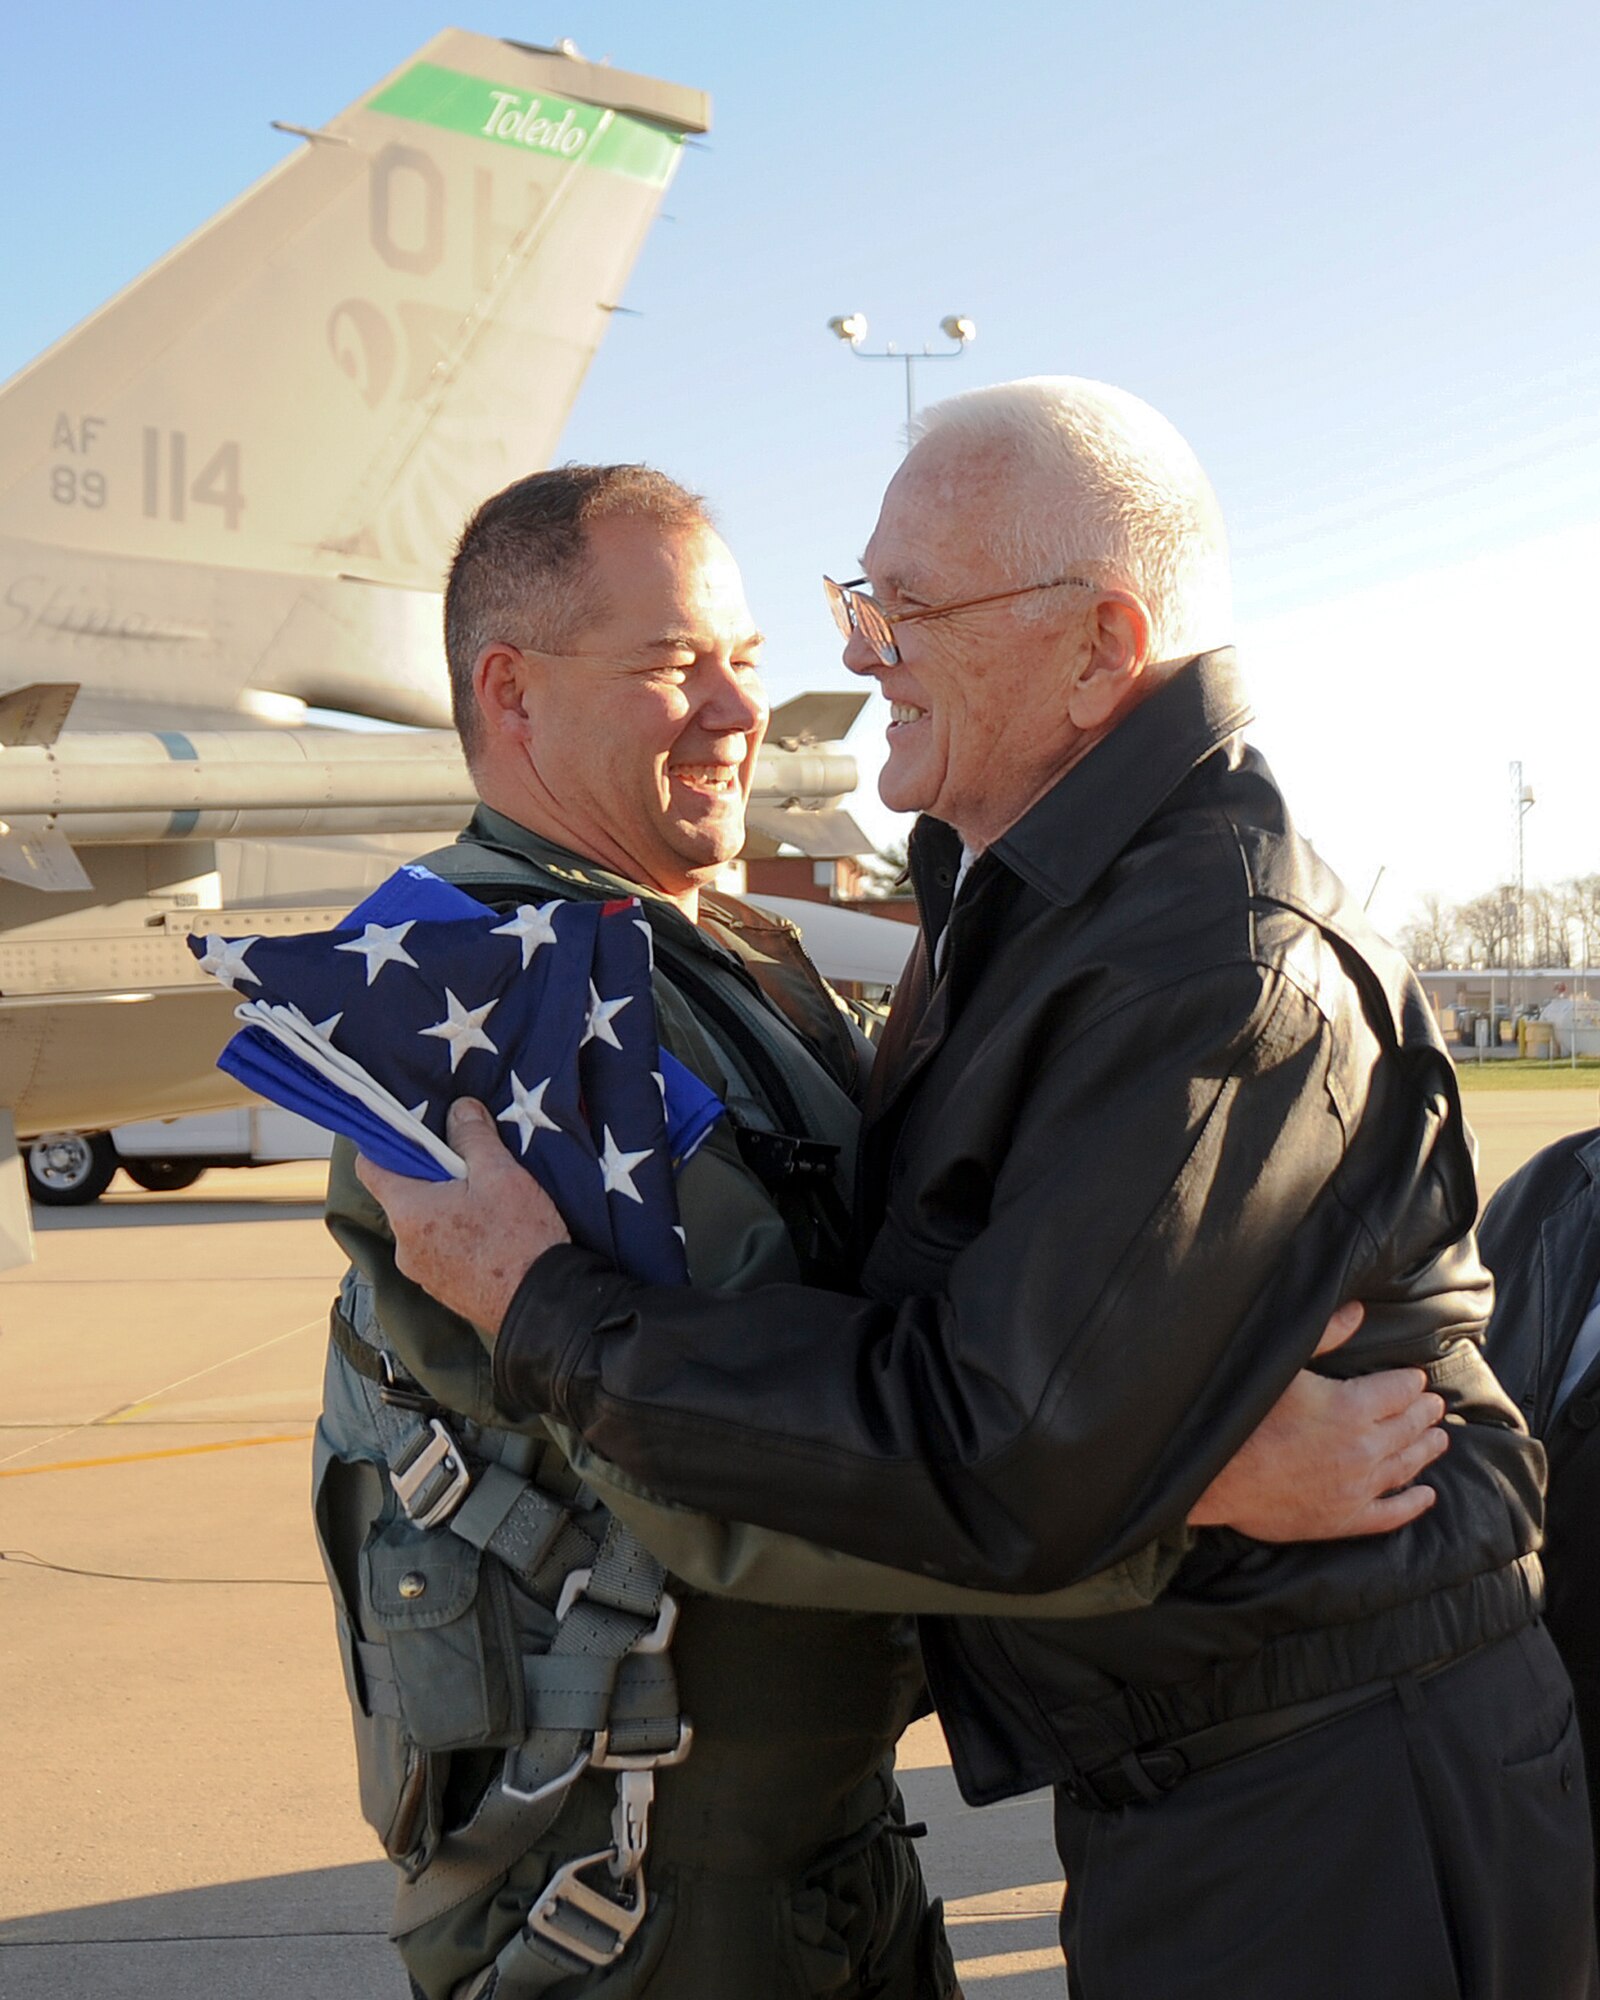 Lt. Col. Tim Moses, 180th FW Operations Support Squadron Commander, receives a hug from Walter Young after Moses presented Mr. Young with an Air Force flag in honor of Young's son, Lt. Mike Young. Moses carried with him an American flag and a United States Air Force flag and flew up the coast of Lake Huron and over the crash site, where a memorial in Lt. Young’s name now stands. 180th Fighter Wing members, along with family and friends of pilot, Lt. Mike Young gathered for a small memorial honoring the pilot, 20 years after Young died when his A-7 Corsair crashed during a routine training mission. The group gathered at the 180th Fighter Wing, Ohio Air National Guard Base, Swanton, OH, Nov. 30.